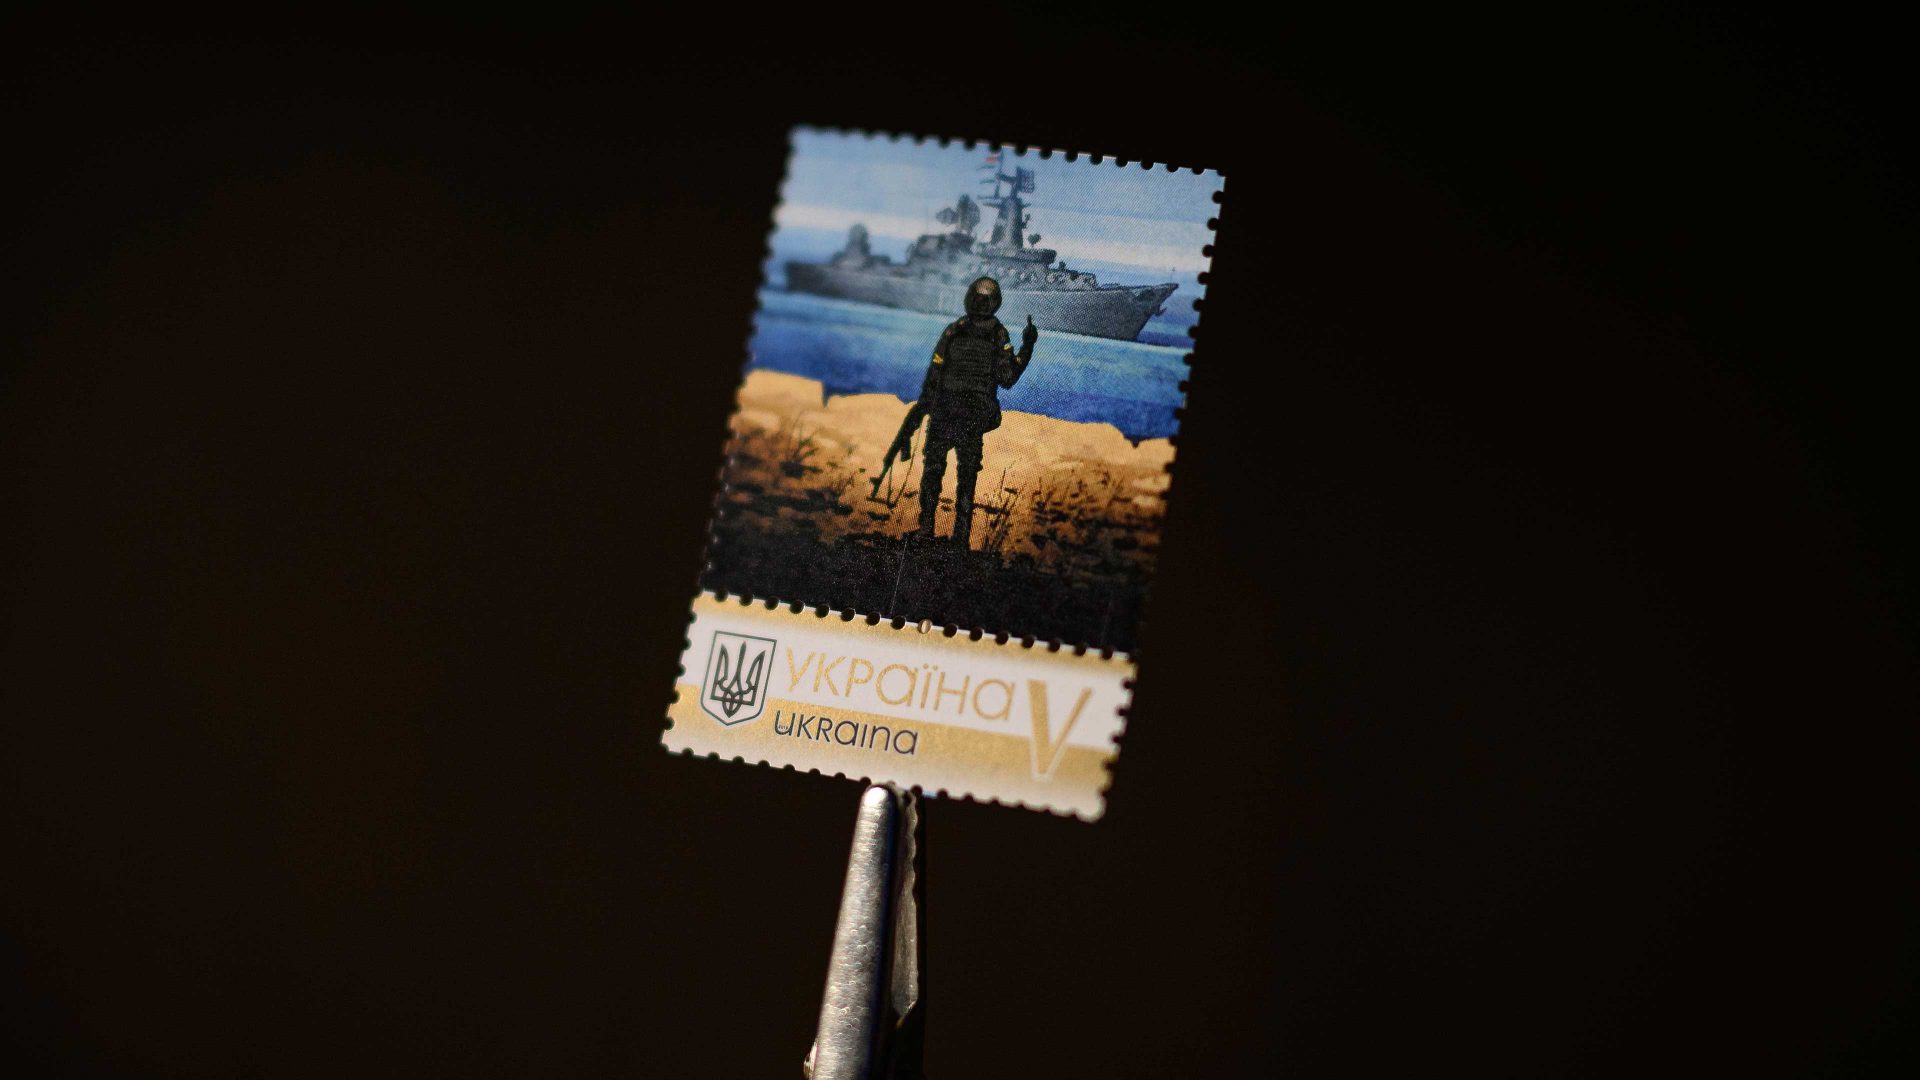 A limited edition "Snake Island" stamp, commemorating the moment when a Ukrainian soldier defiantly replied "Russian warship, go f*ck yourself!" when ordered to surrender. Photo: Leon Neal/Getty Images